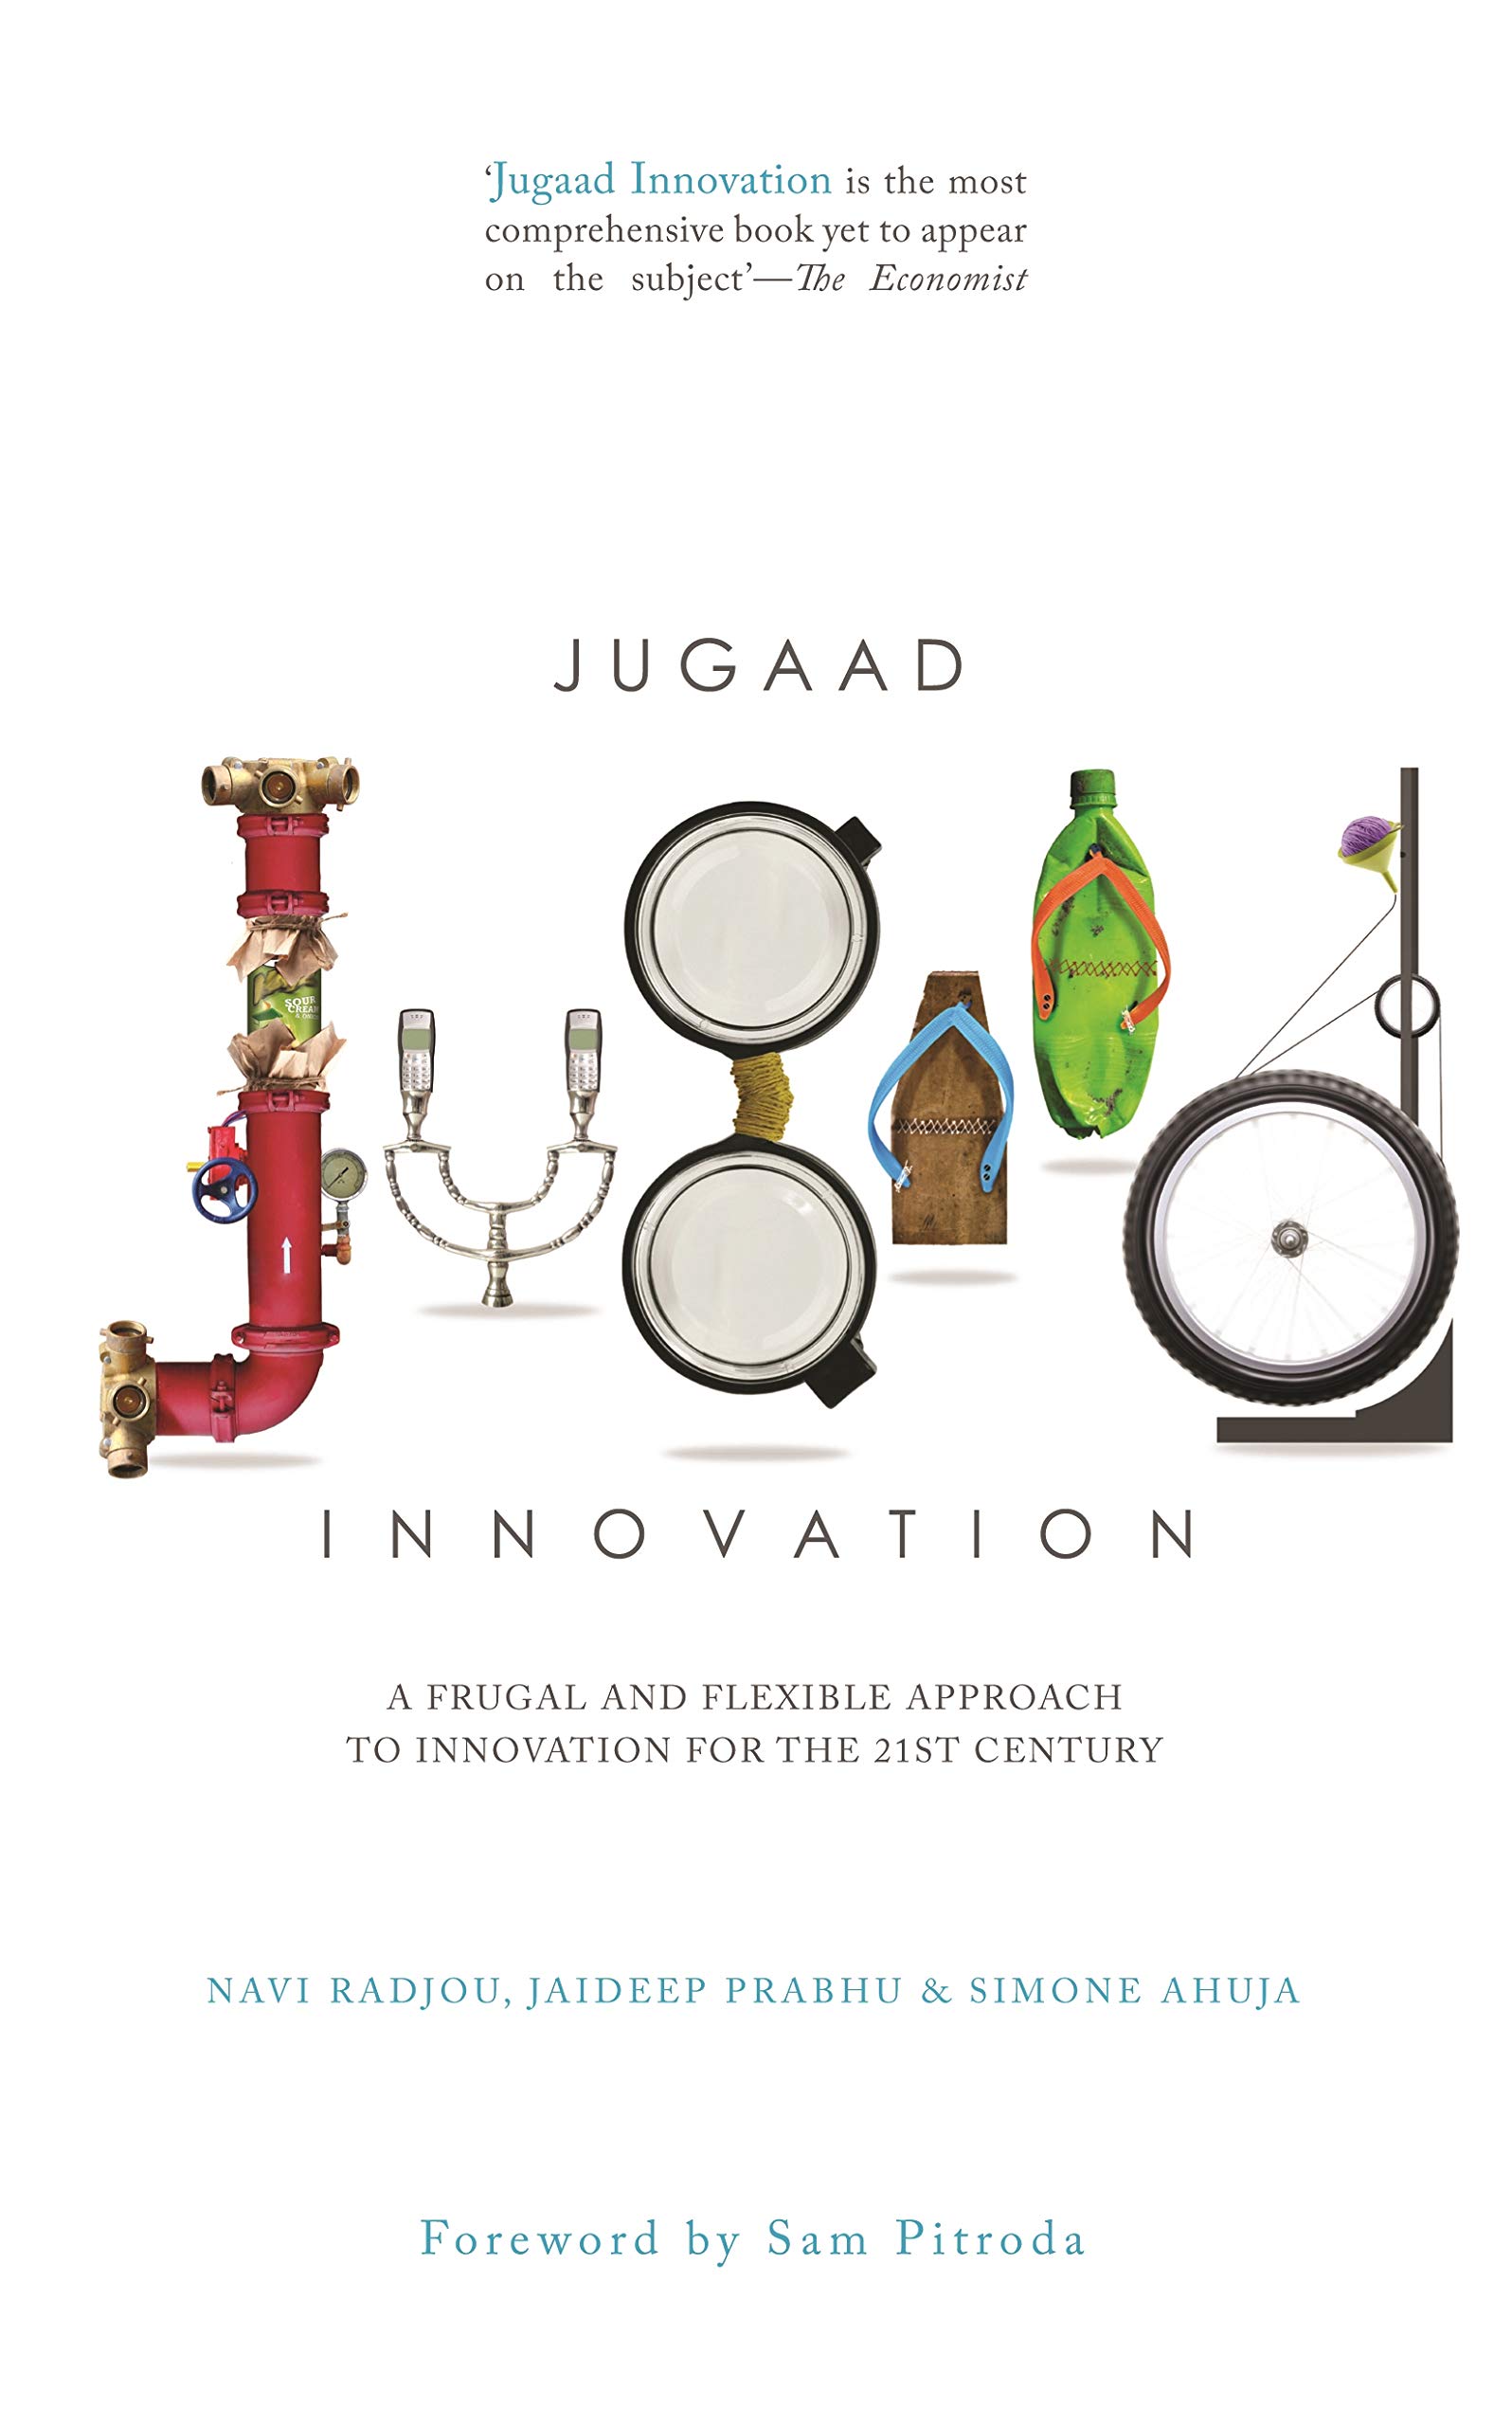 Jugaad Innovation: A Frugal and Flexible Approach to Innovation for the 21st Century